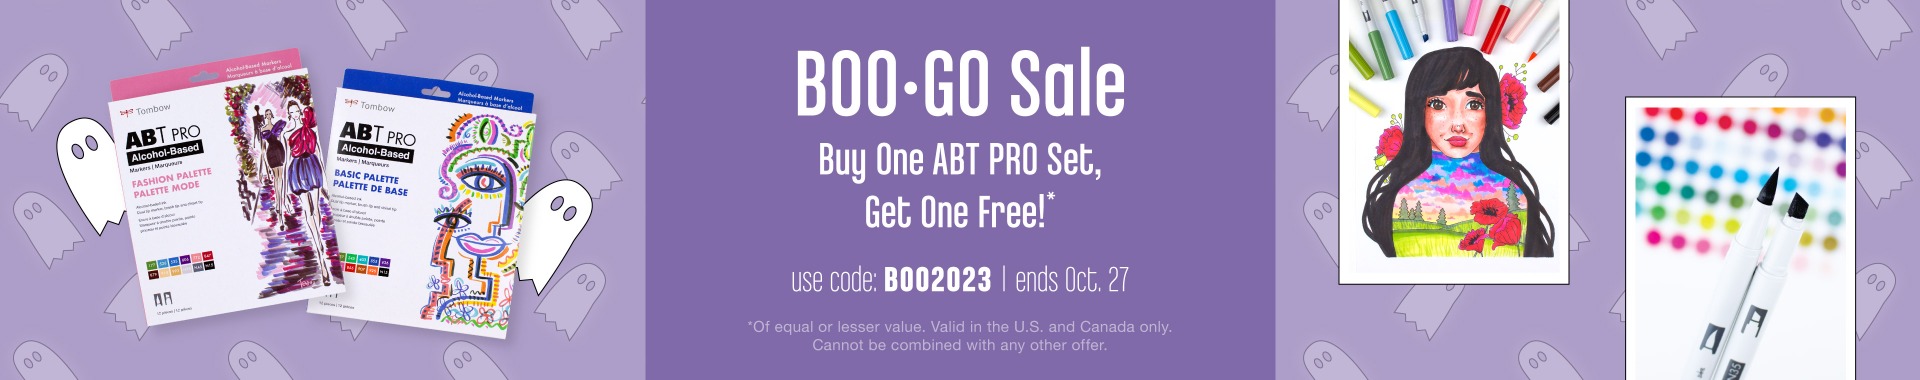 Buy one ABT PRO set and get one free!